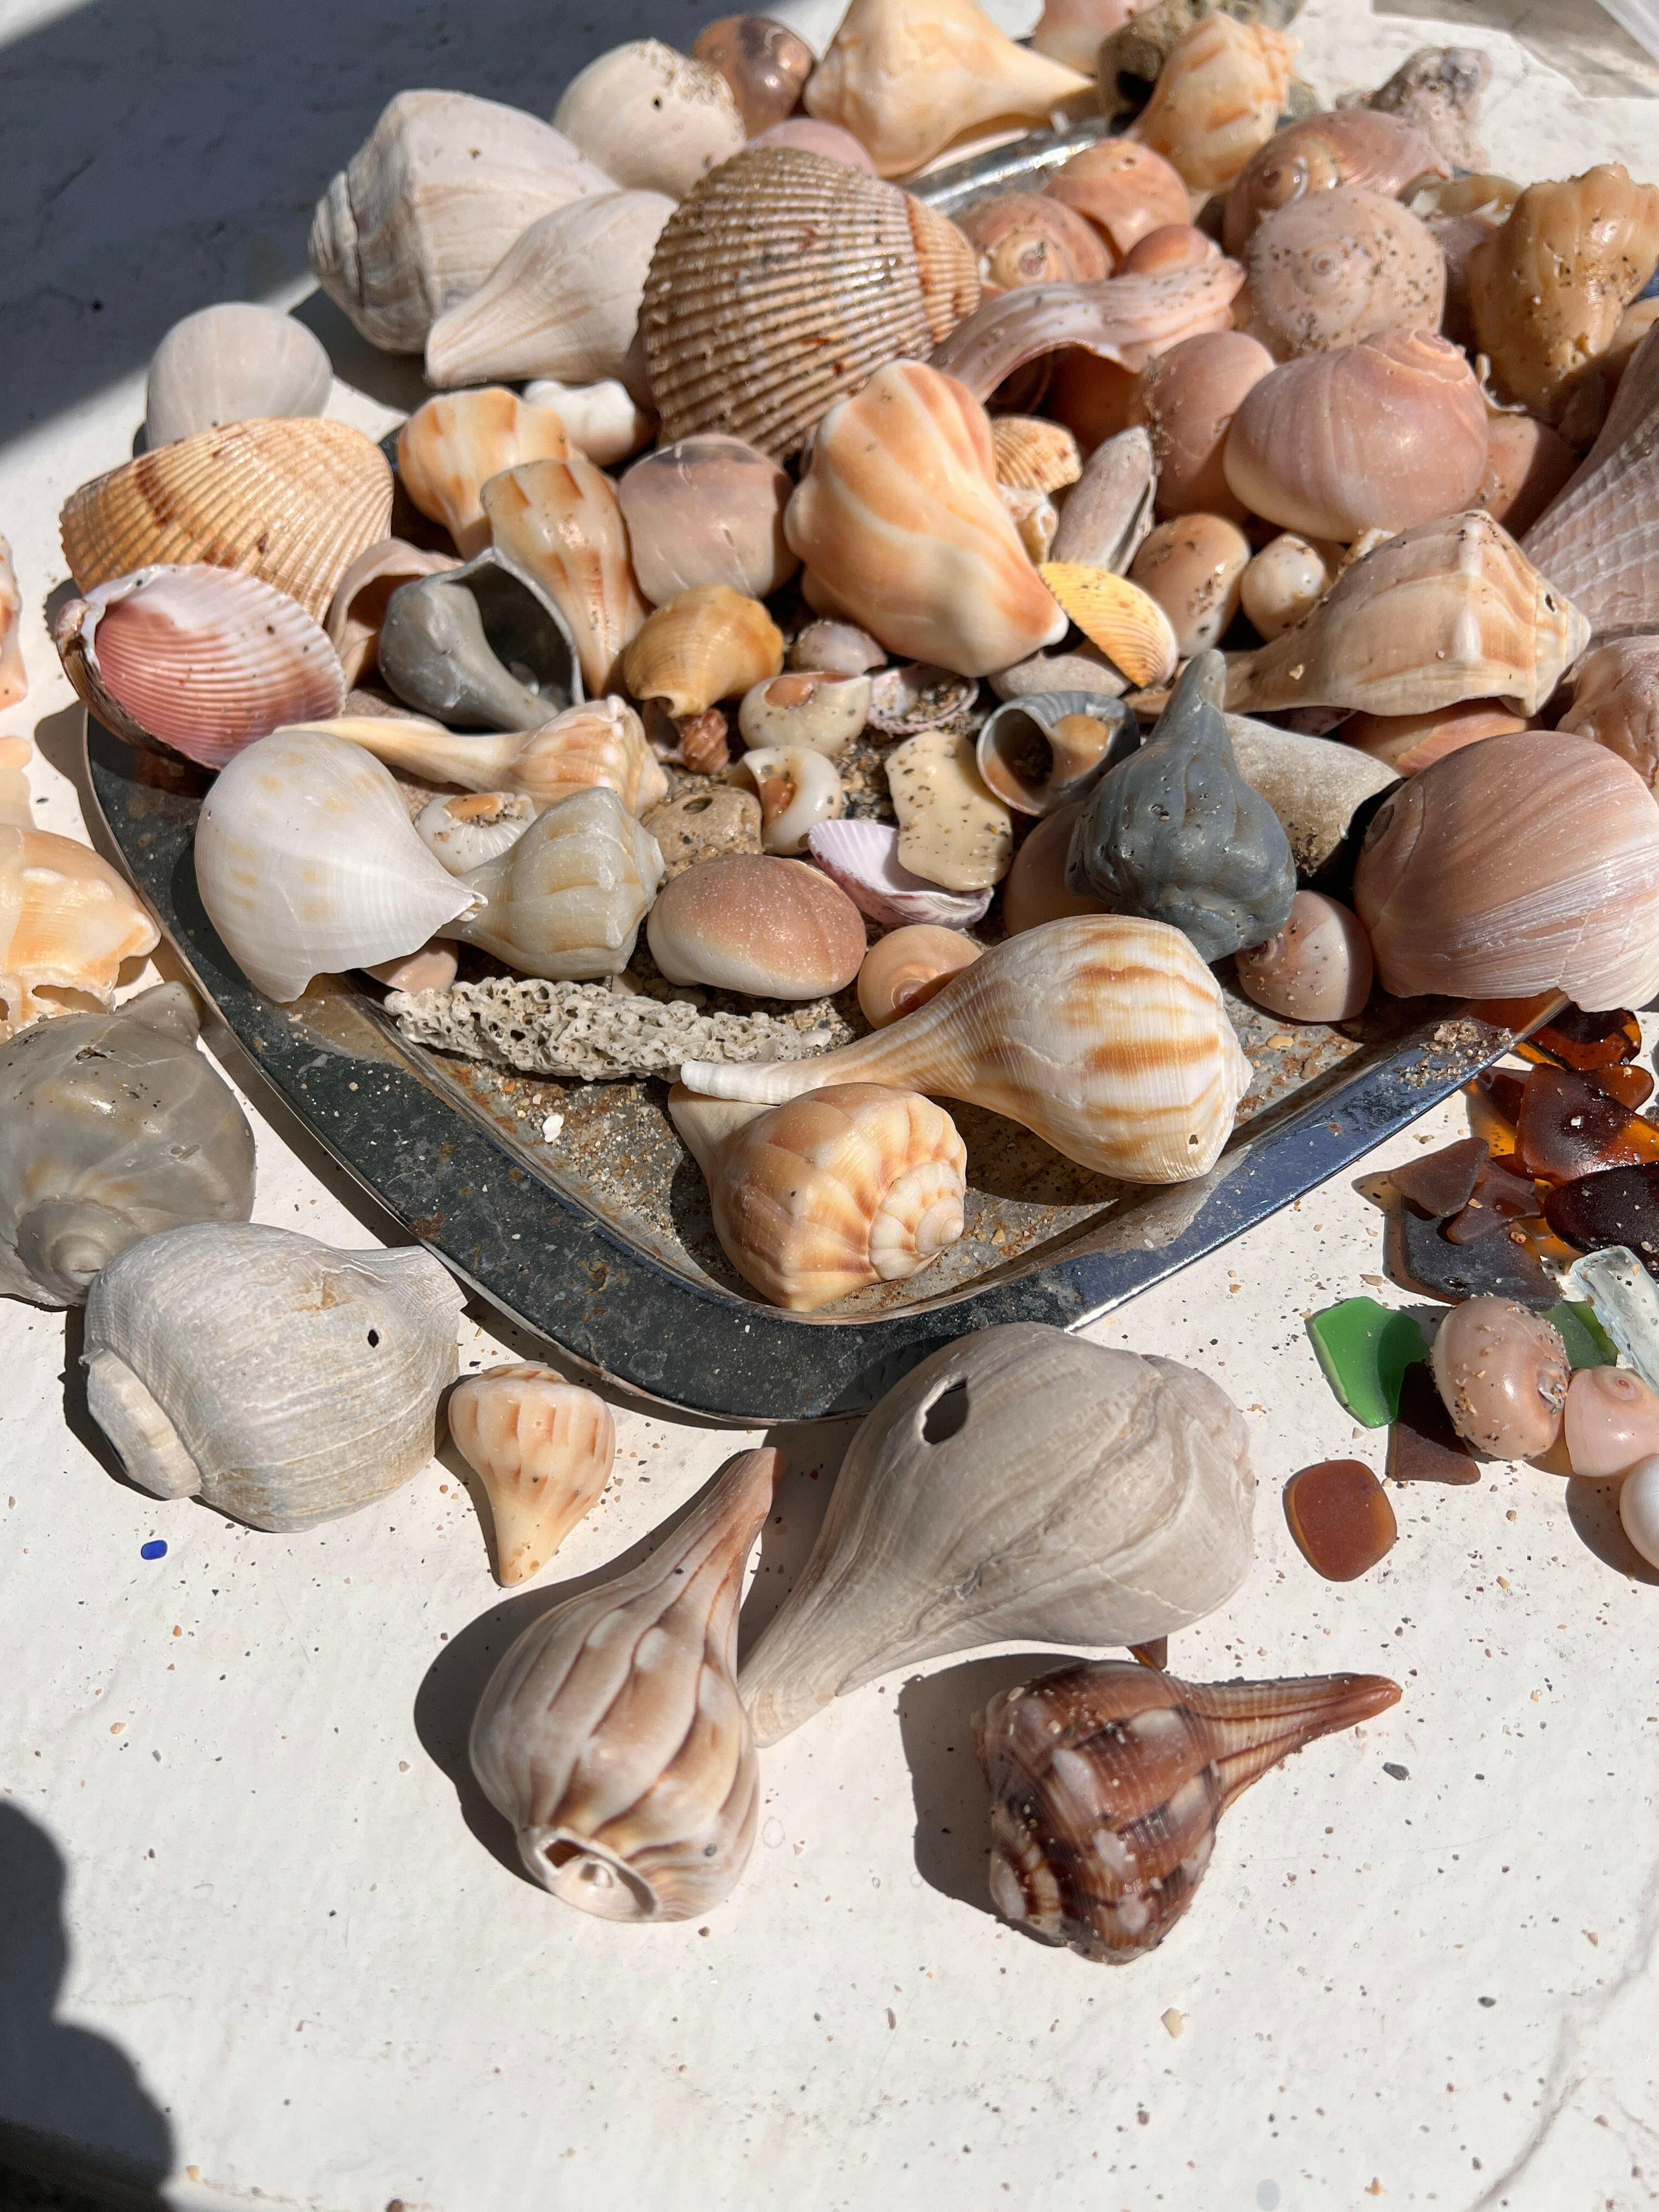 SeaShells Bulk for Sale - Discover the Best Florida Beach Shells Collection